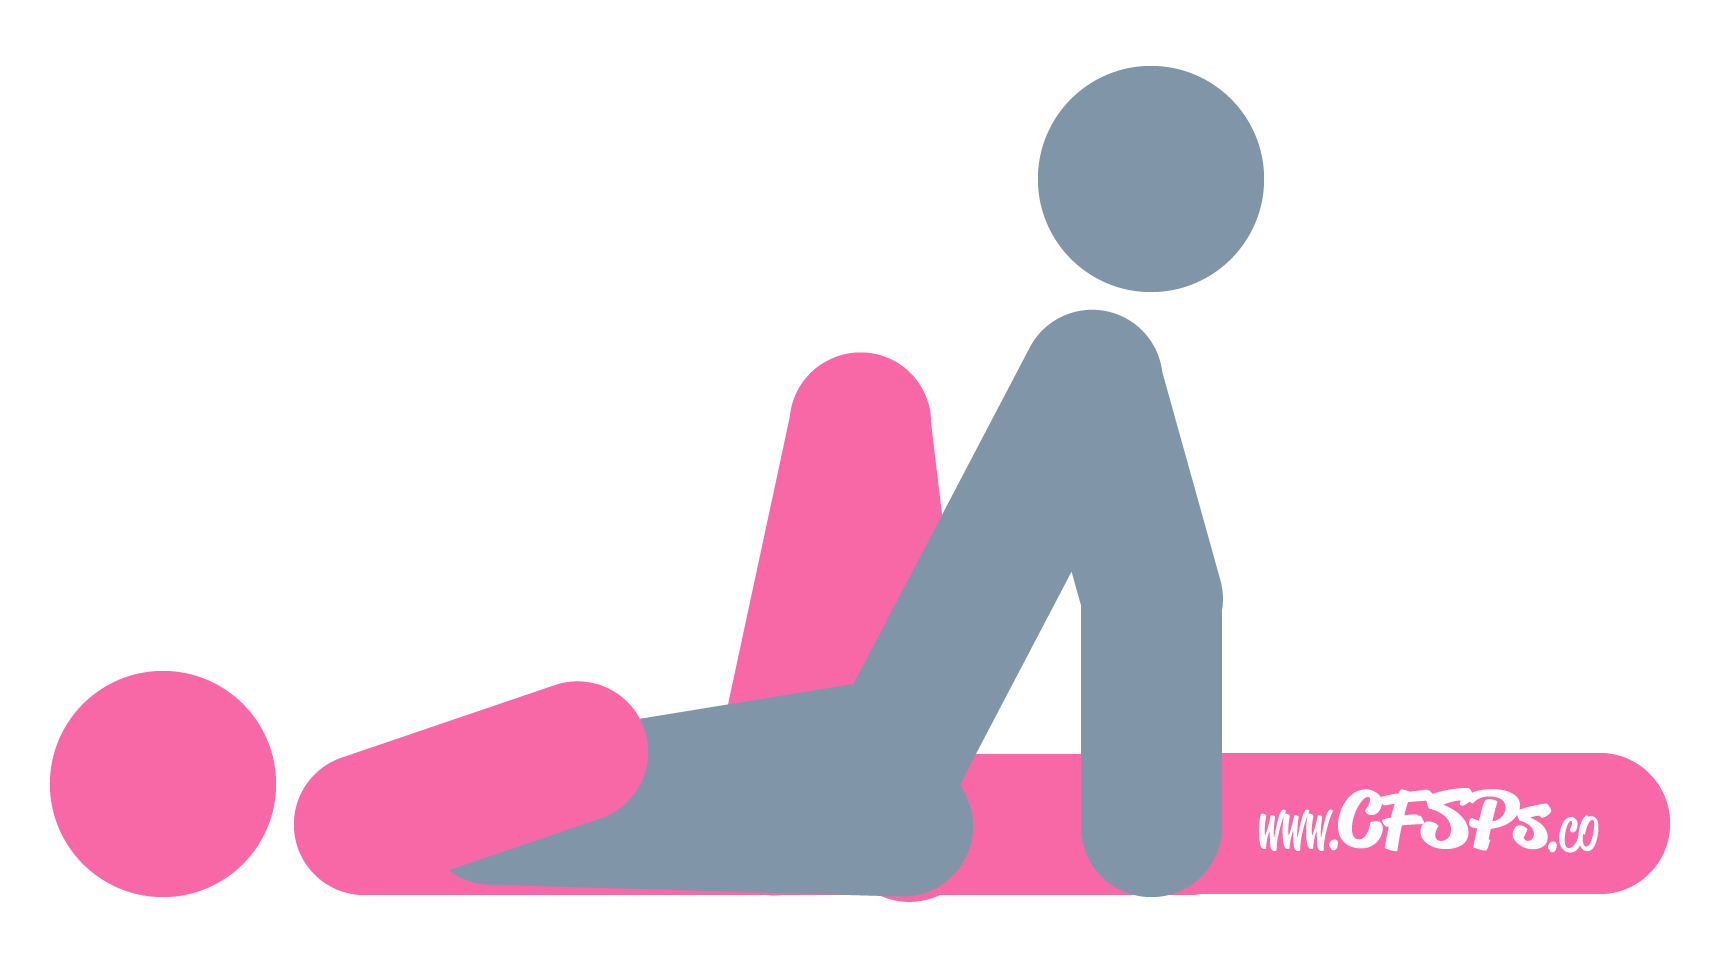 An illustration of the Star sex position. This picture demonstrates how Star is a man-on-top sex position with easy access for manual clitoral stimulation while having sex.